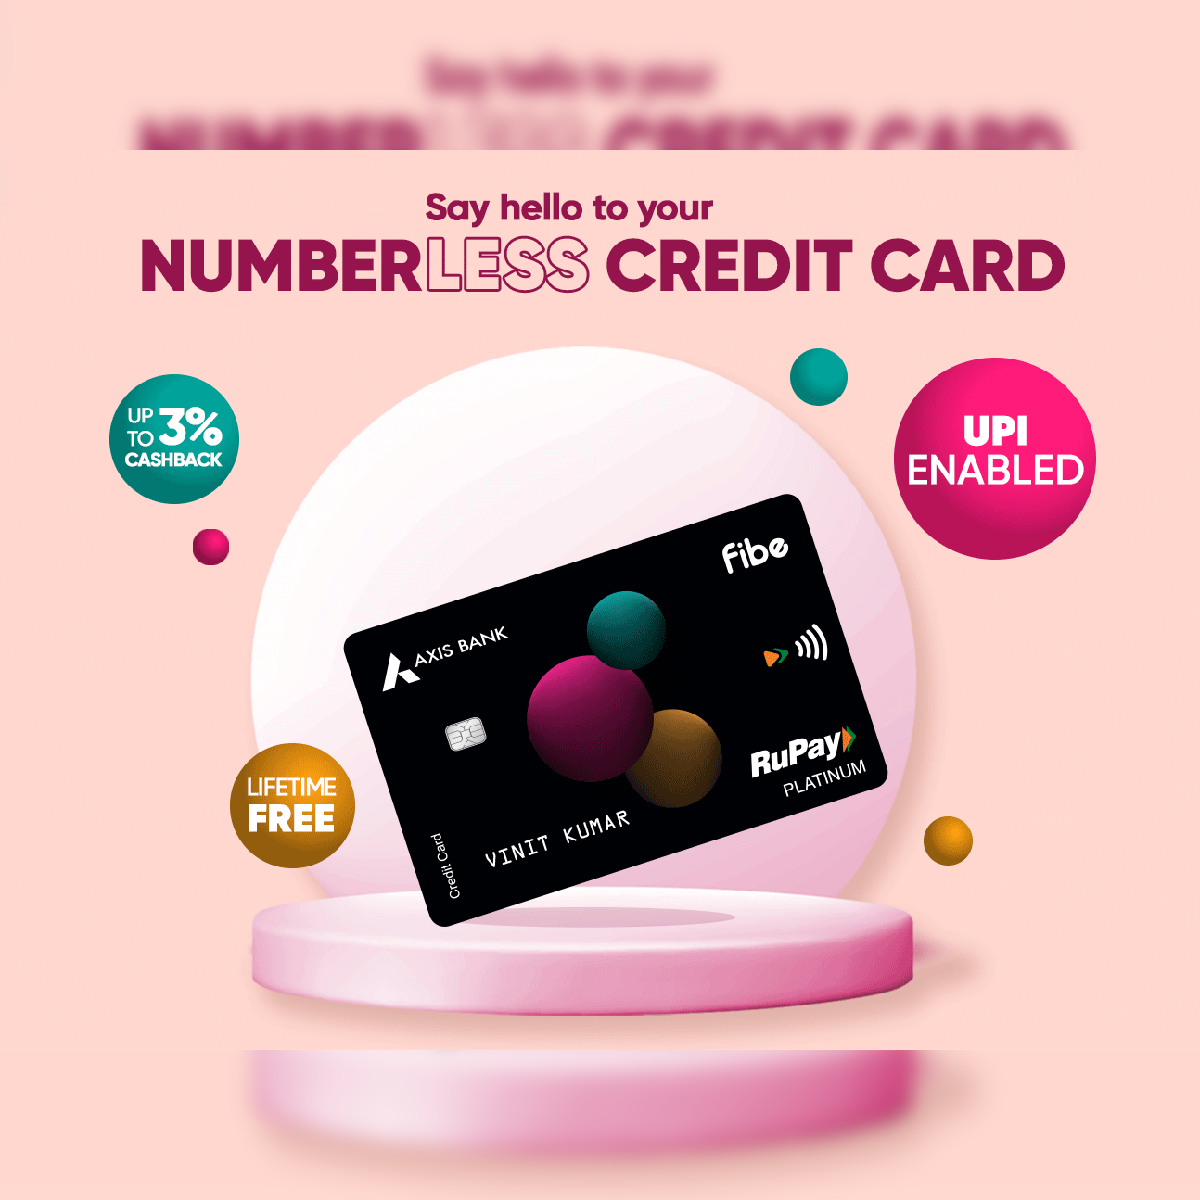 https://img.etimg.com/thumb/width-1200,height-1200,imgsize-148321,resizemode-75,msid-104315566/wealth/spend/first-numberless-credit-card-launched-by-axis-bank-fibe-up-to-3-cashback-upi-enabled-and-other-features.jpg